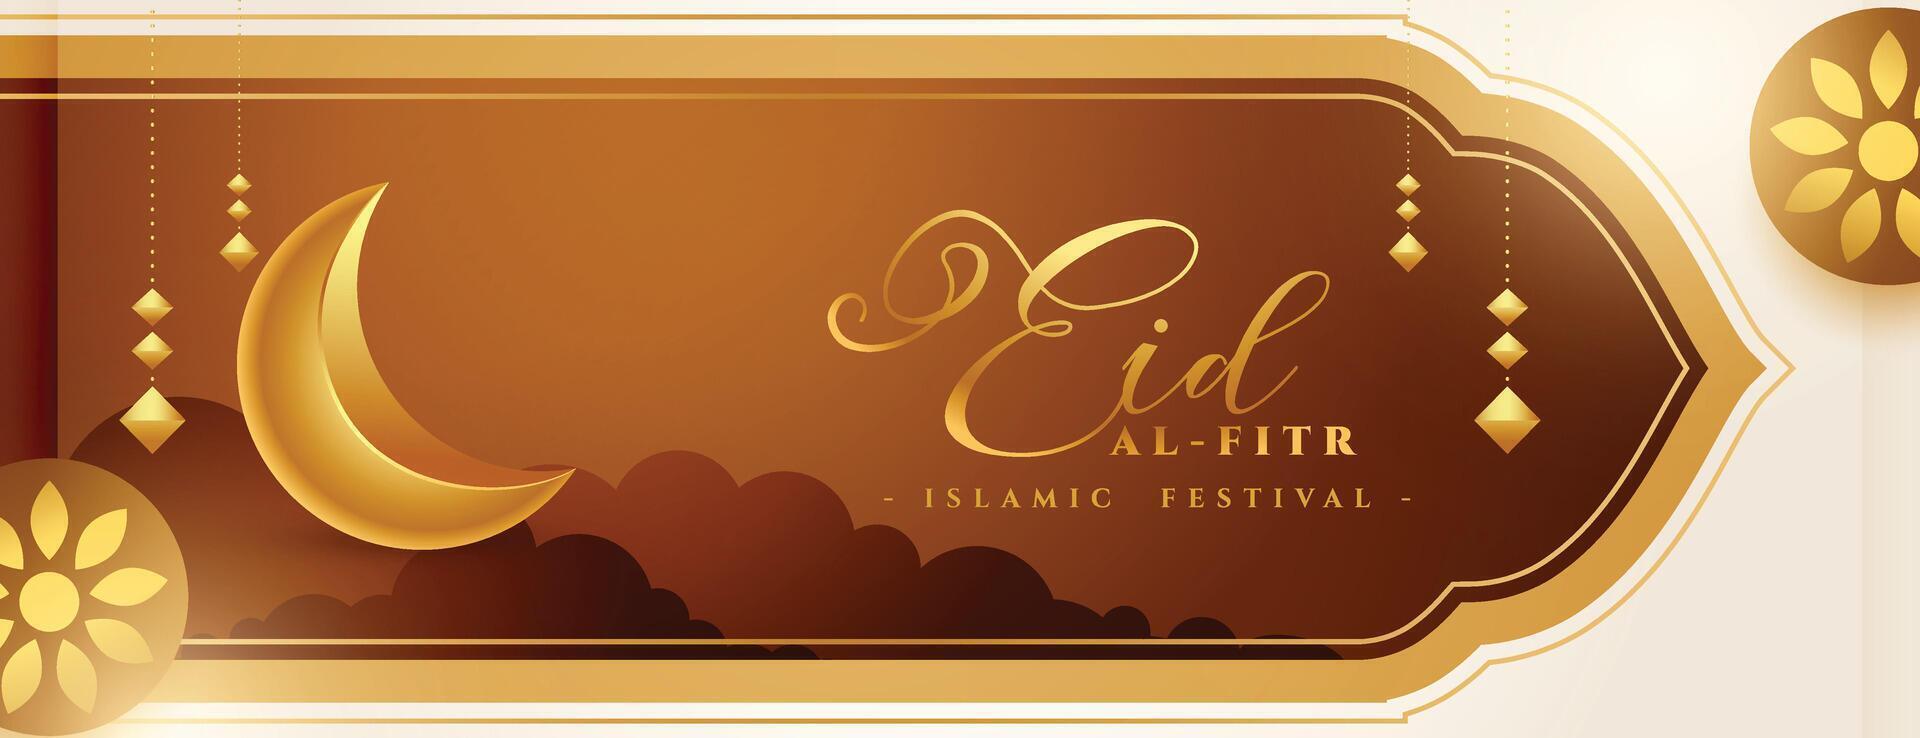 traditional eid al fitr wishes banner with 3d golden crescent vector